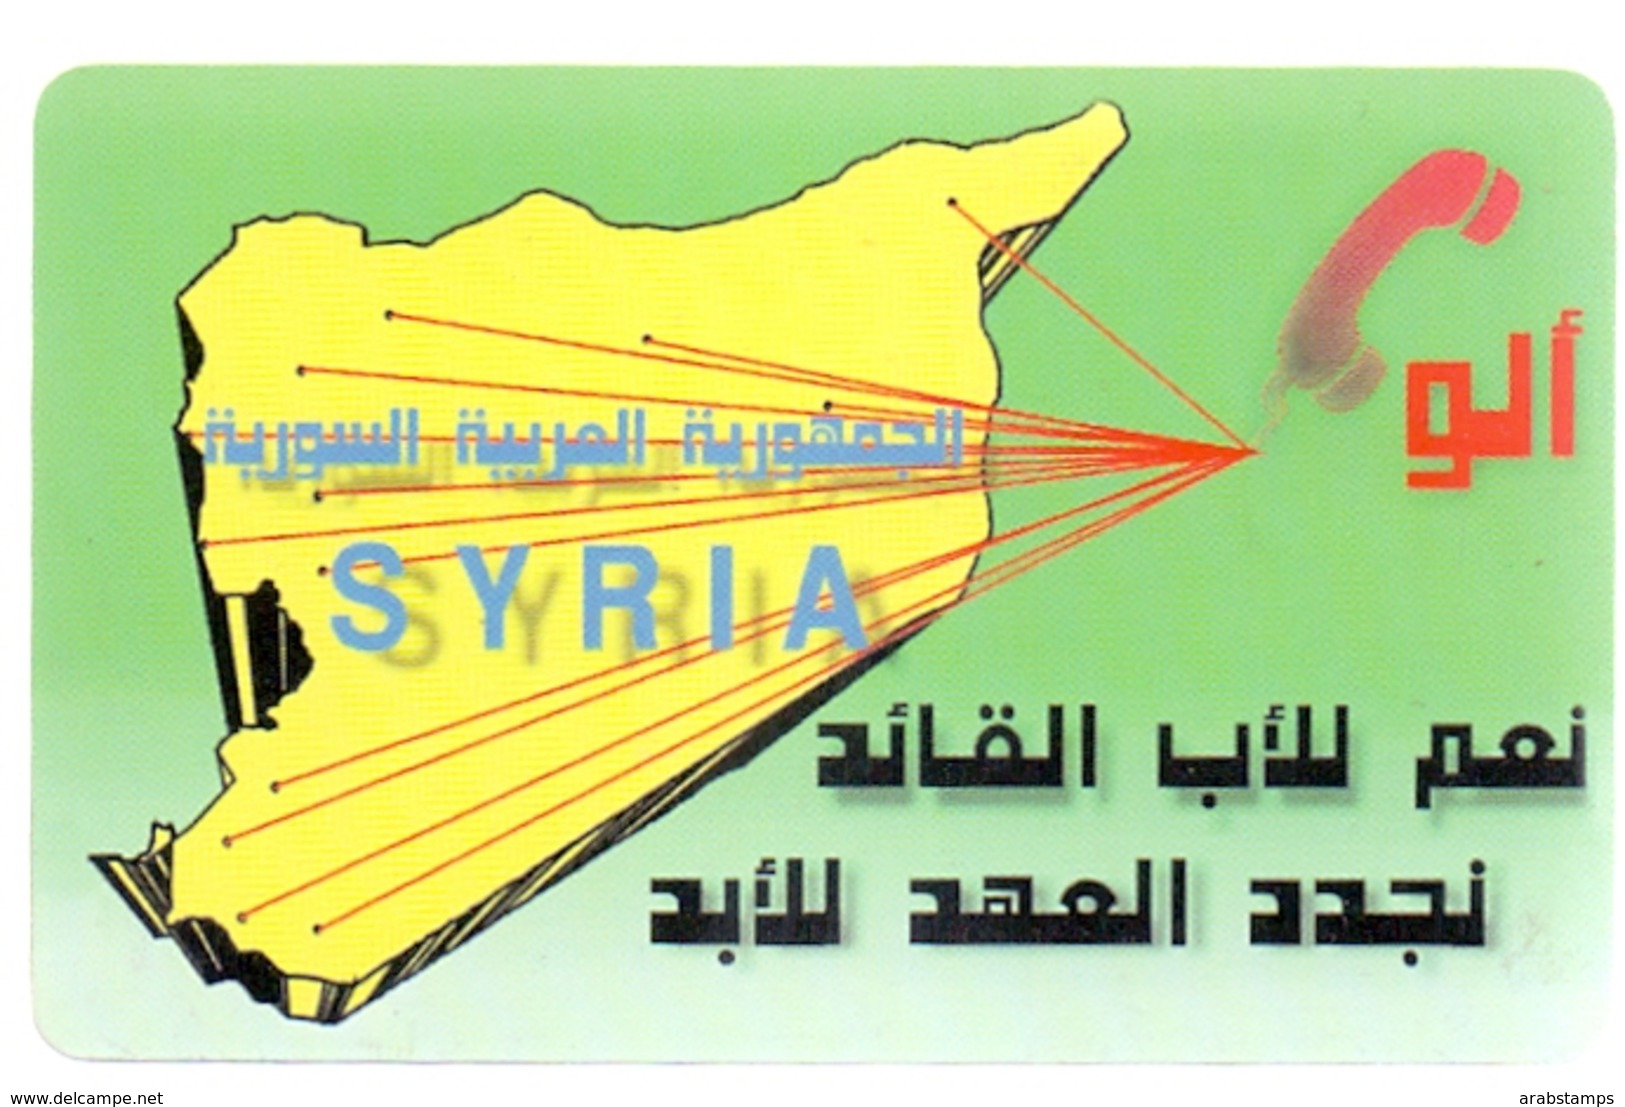 Syria Phonecards Used The Value 500 Syrian Pound - Syria